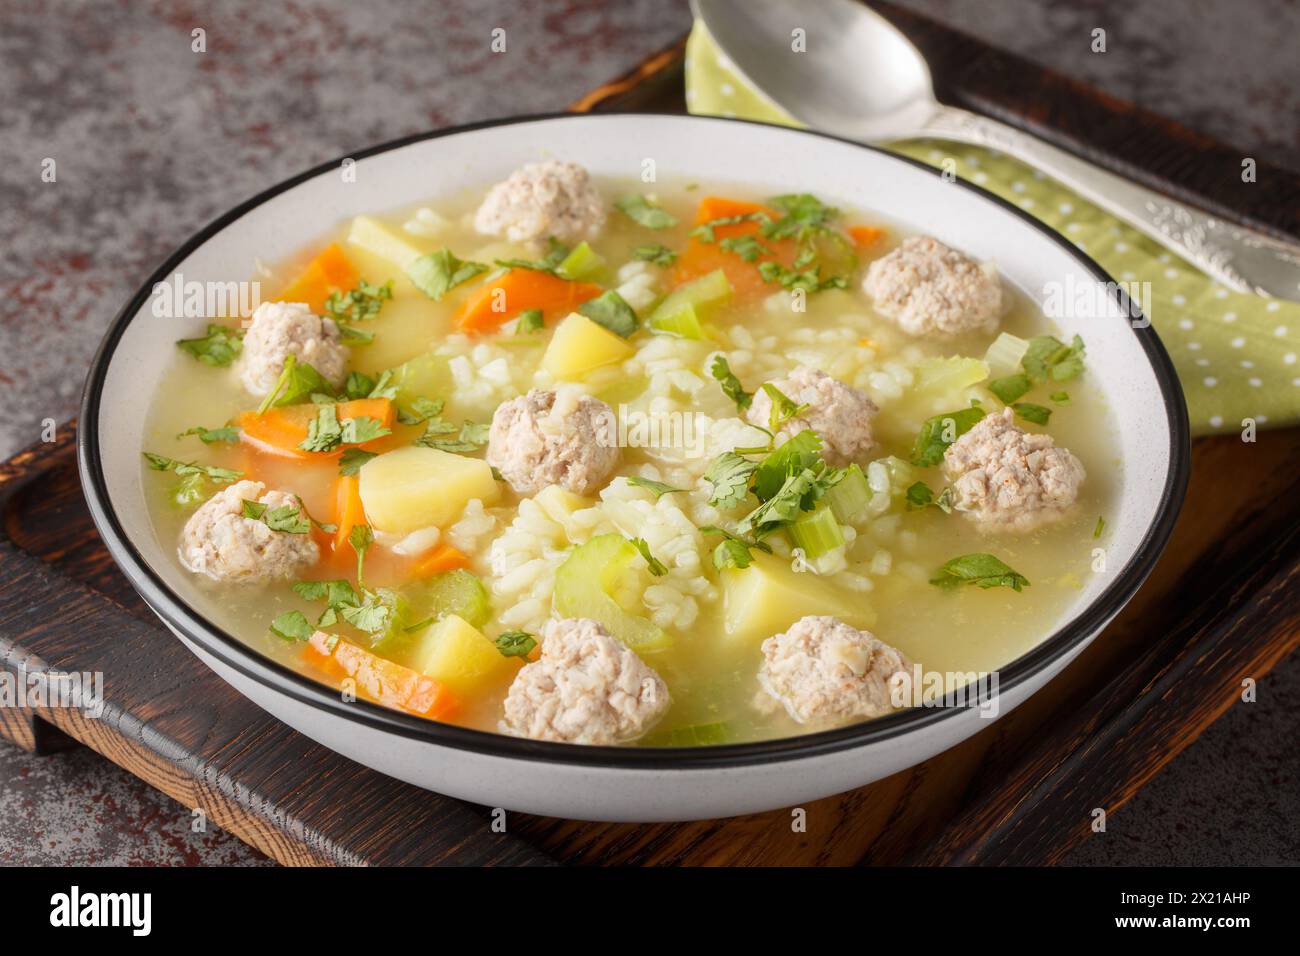 Hot homemade Rice Meatball Soup with celery, carrots, onions and potatoes close-up in a bowl on the table. Horizontal Stock Photo